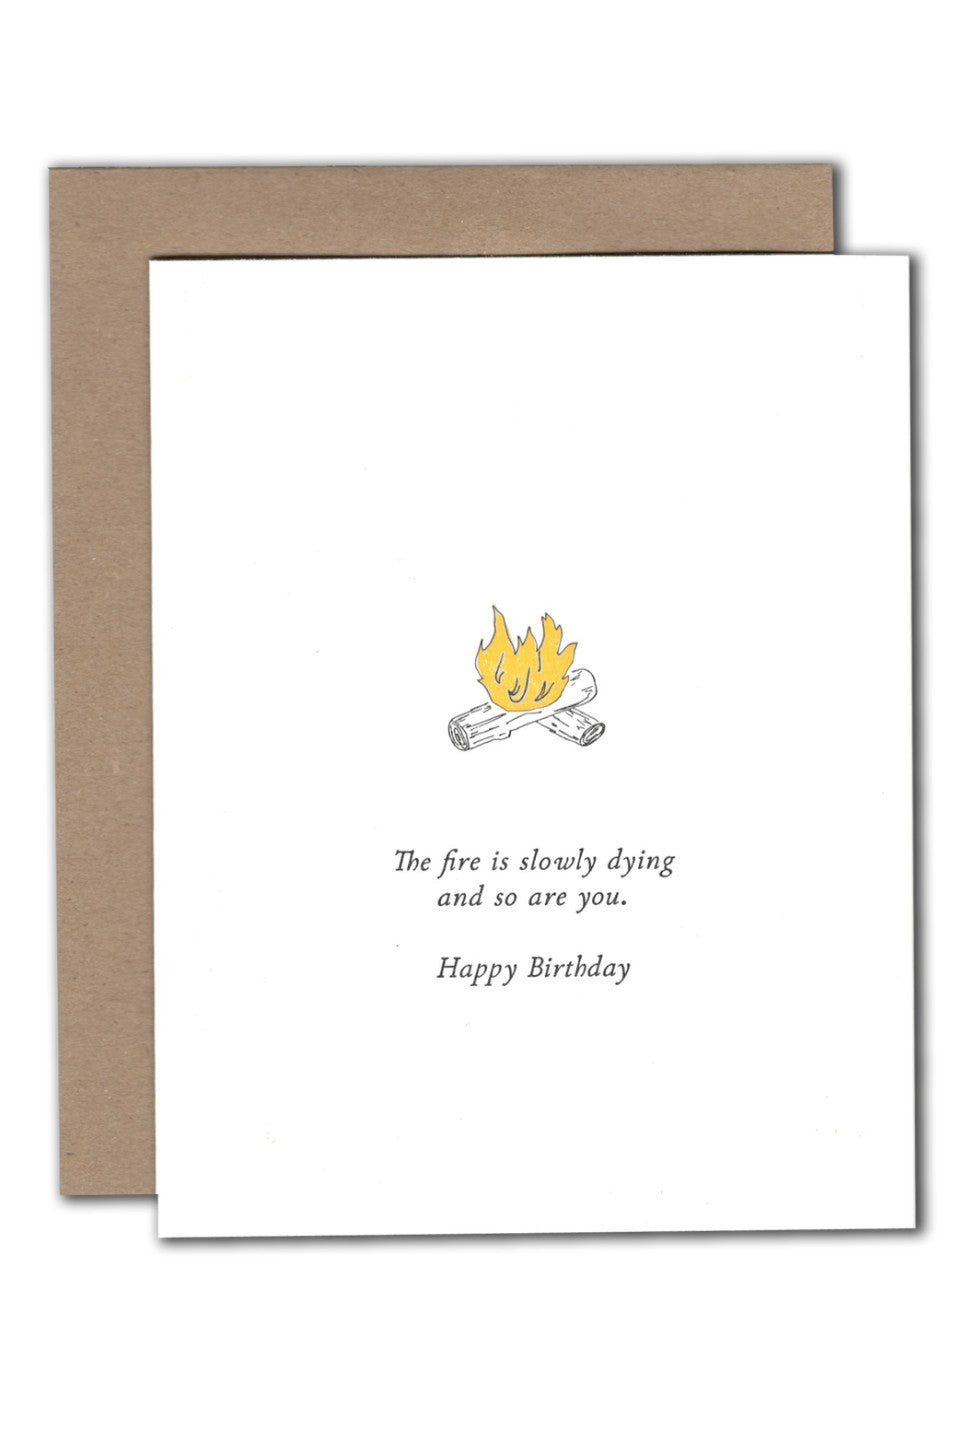 Power & Light Press - Dying Bday Card